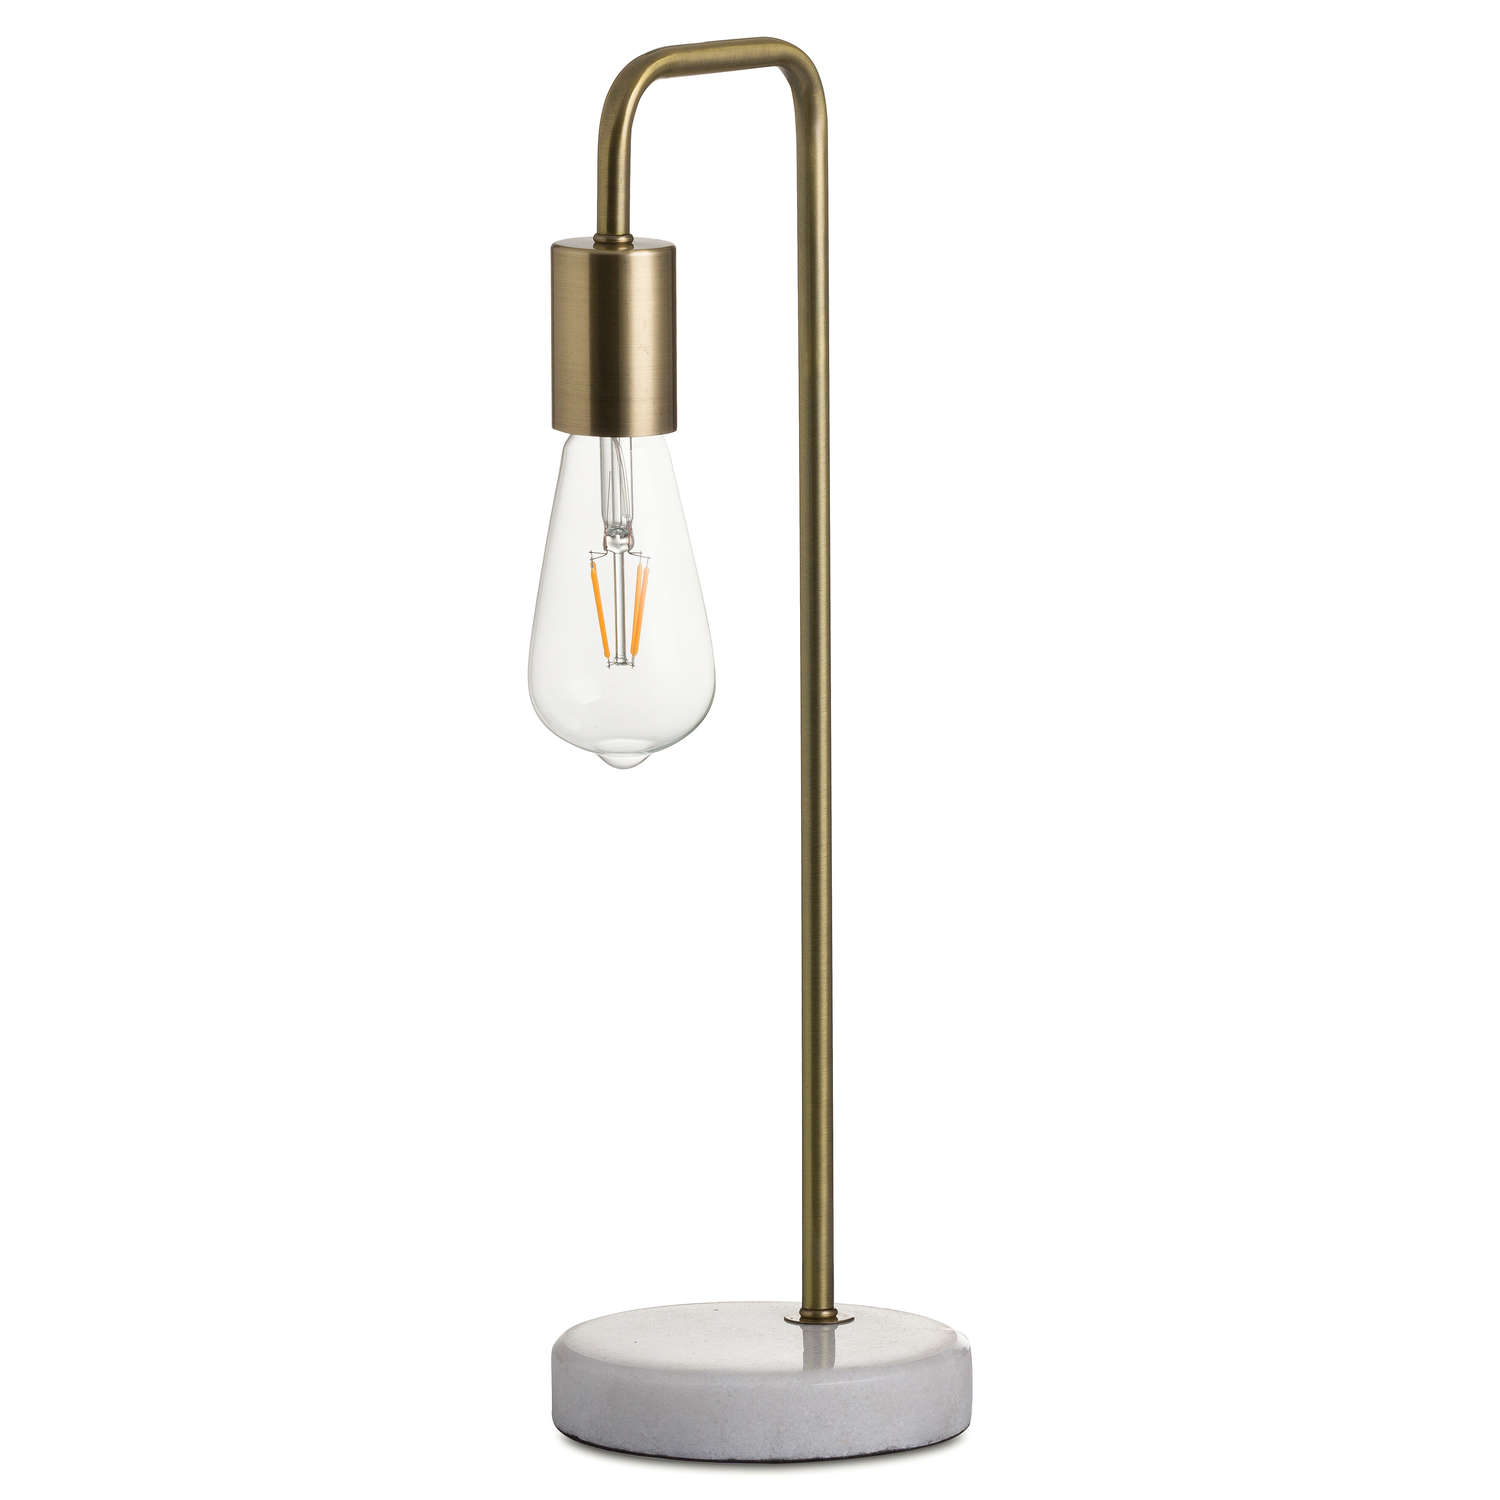 Marble And Brass Industrial Desk Lamp - Image 1